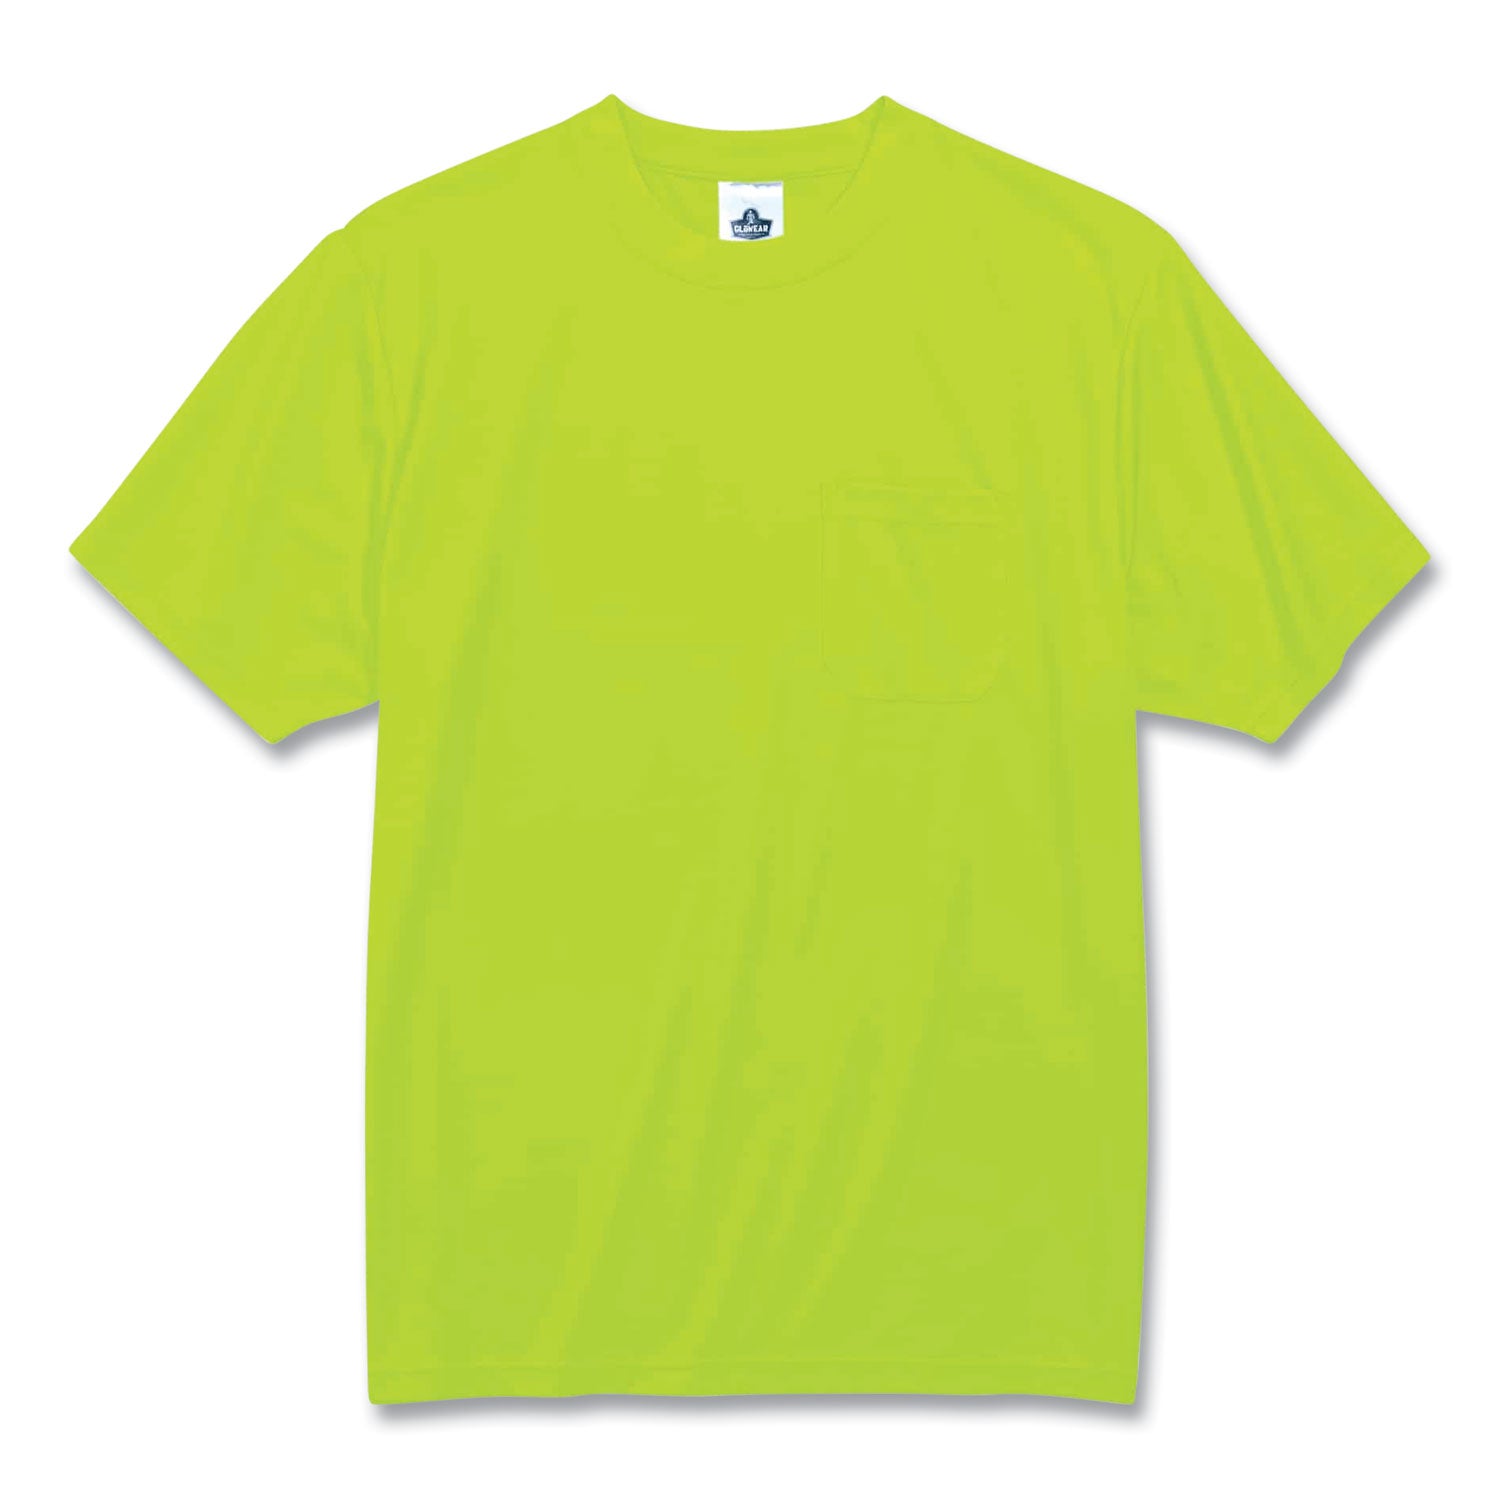 glowear-8089-non-certified-hi-vis-t-shirt-polyester-2x-large-lime-ships-in-1-3-business-days_ego21556 - 3